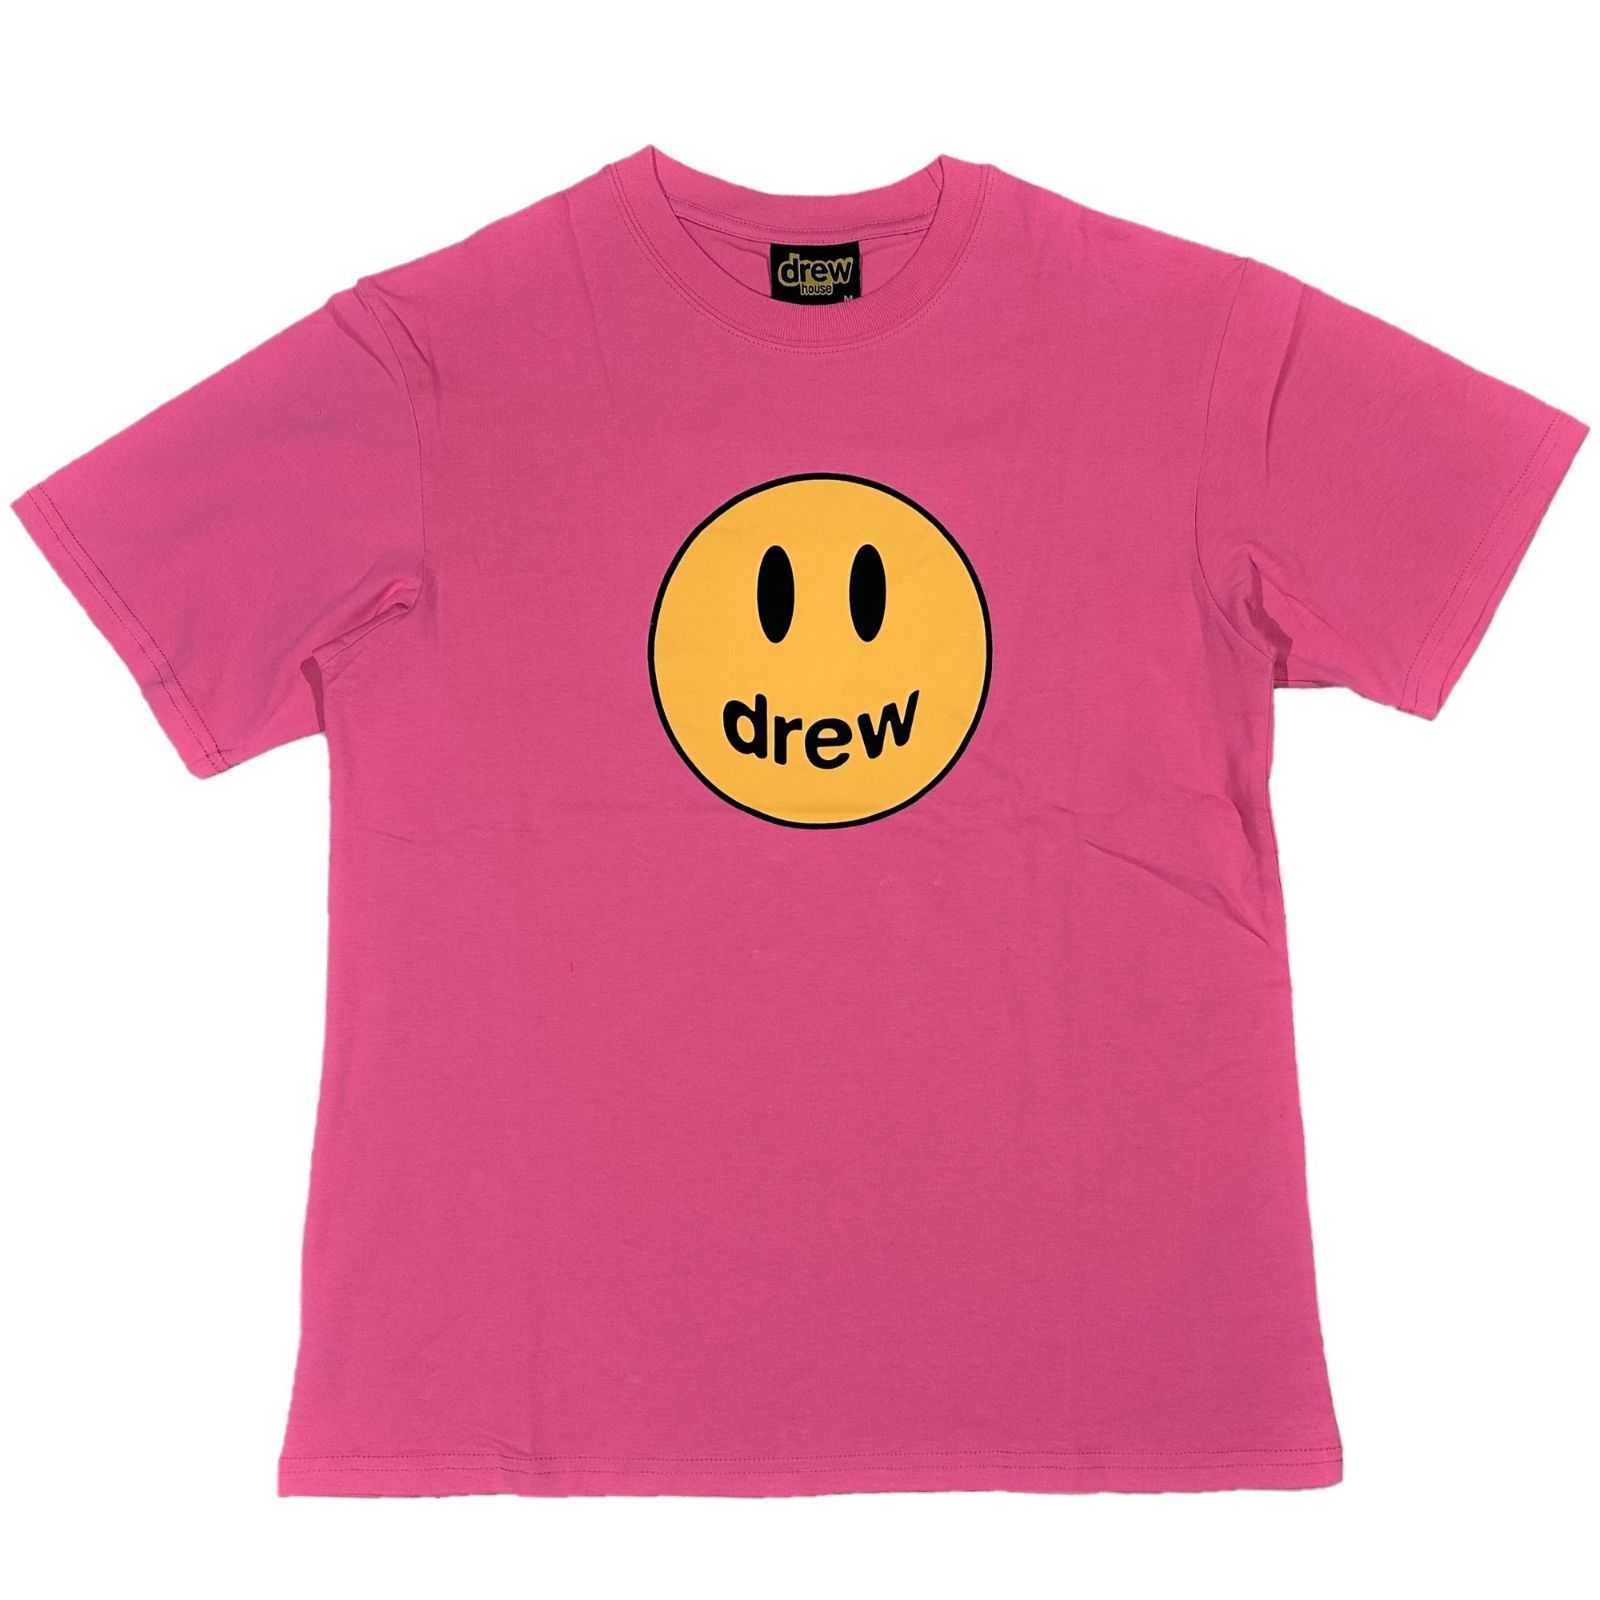 DREW HOUSE マスコットプリント 半袖 Tシャツ ピンク - Real Time 24